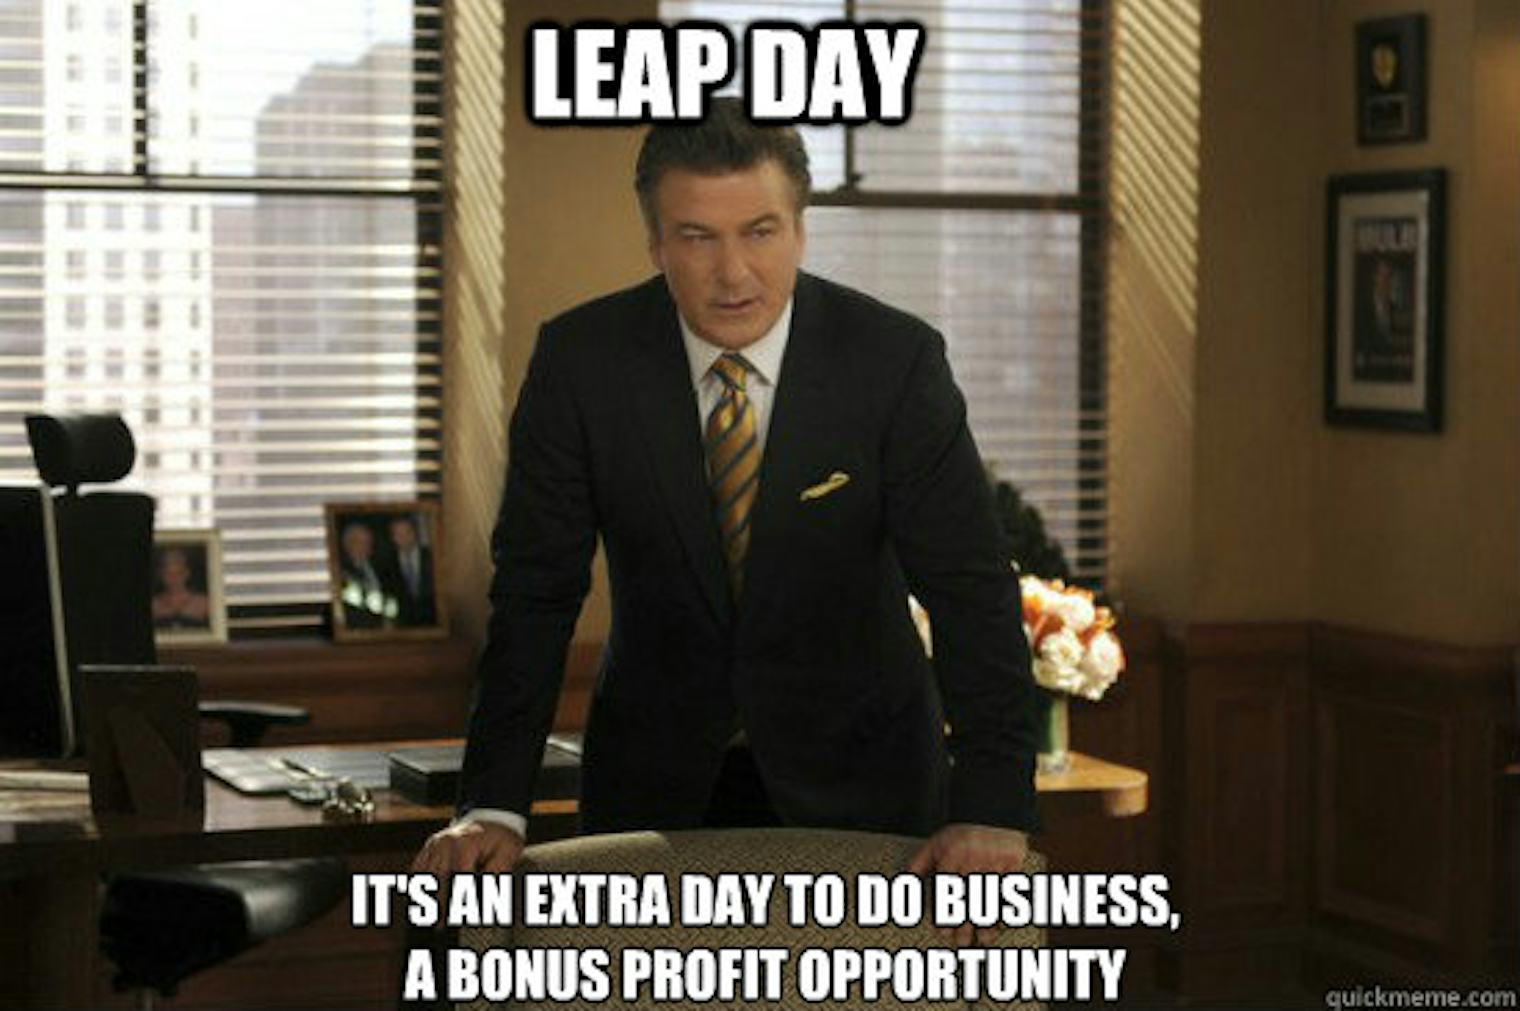 10 Leap Day Memes For Feb. 29, Because You've Got A Whole Extra Day To